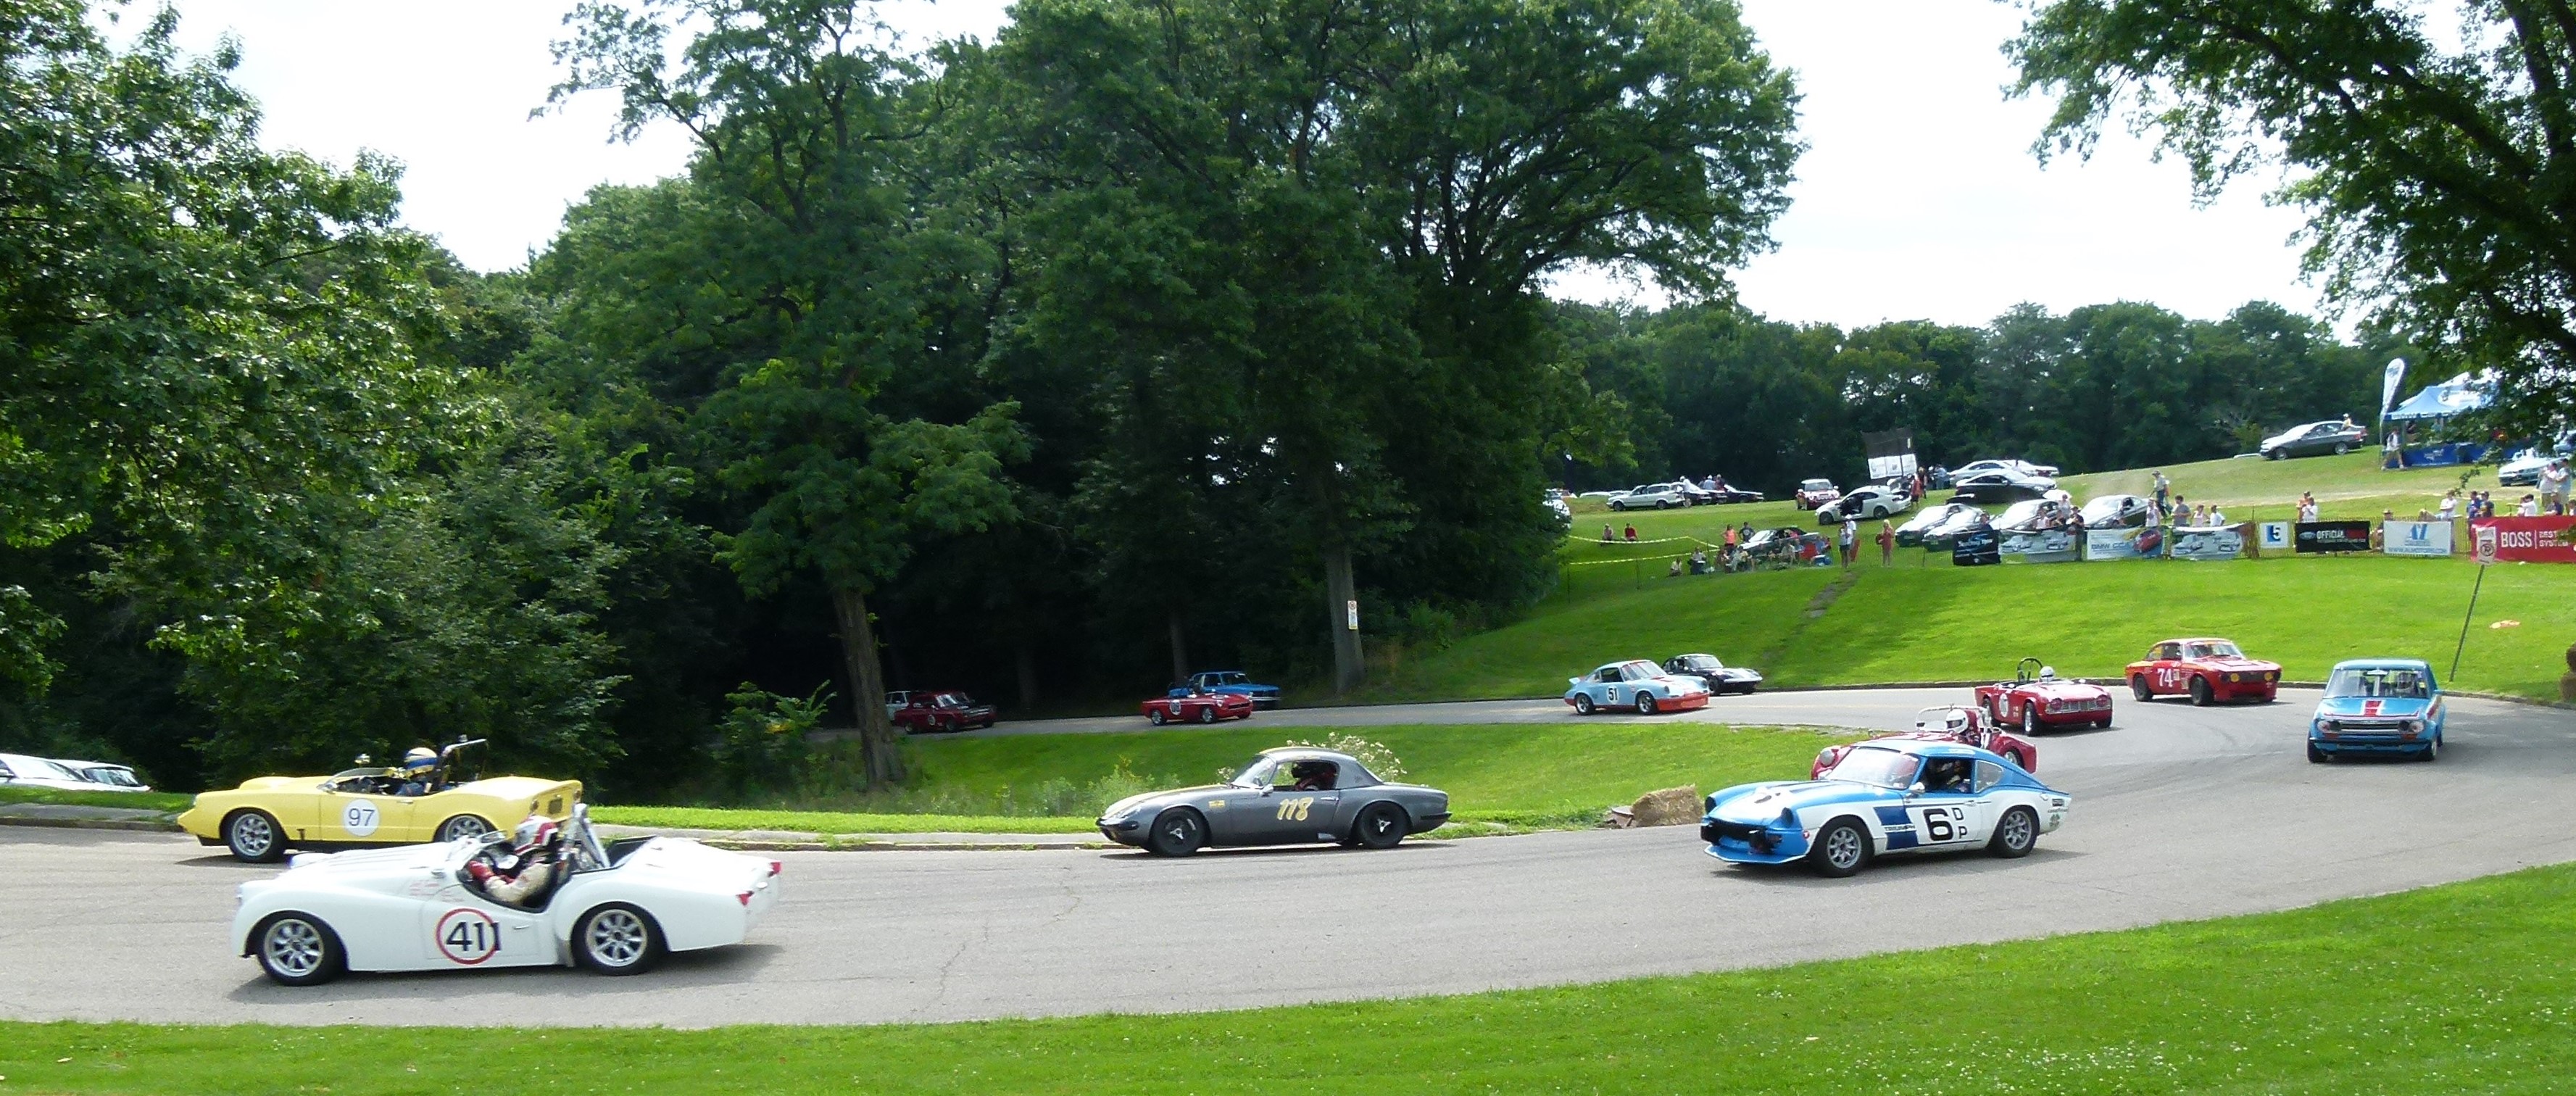 The 97 and 41 cars emerge from the sharp curve.